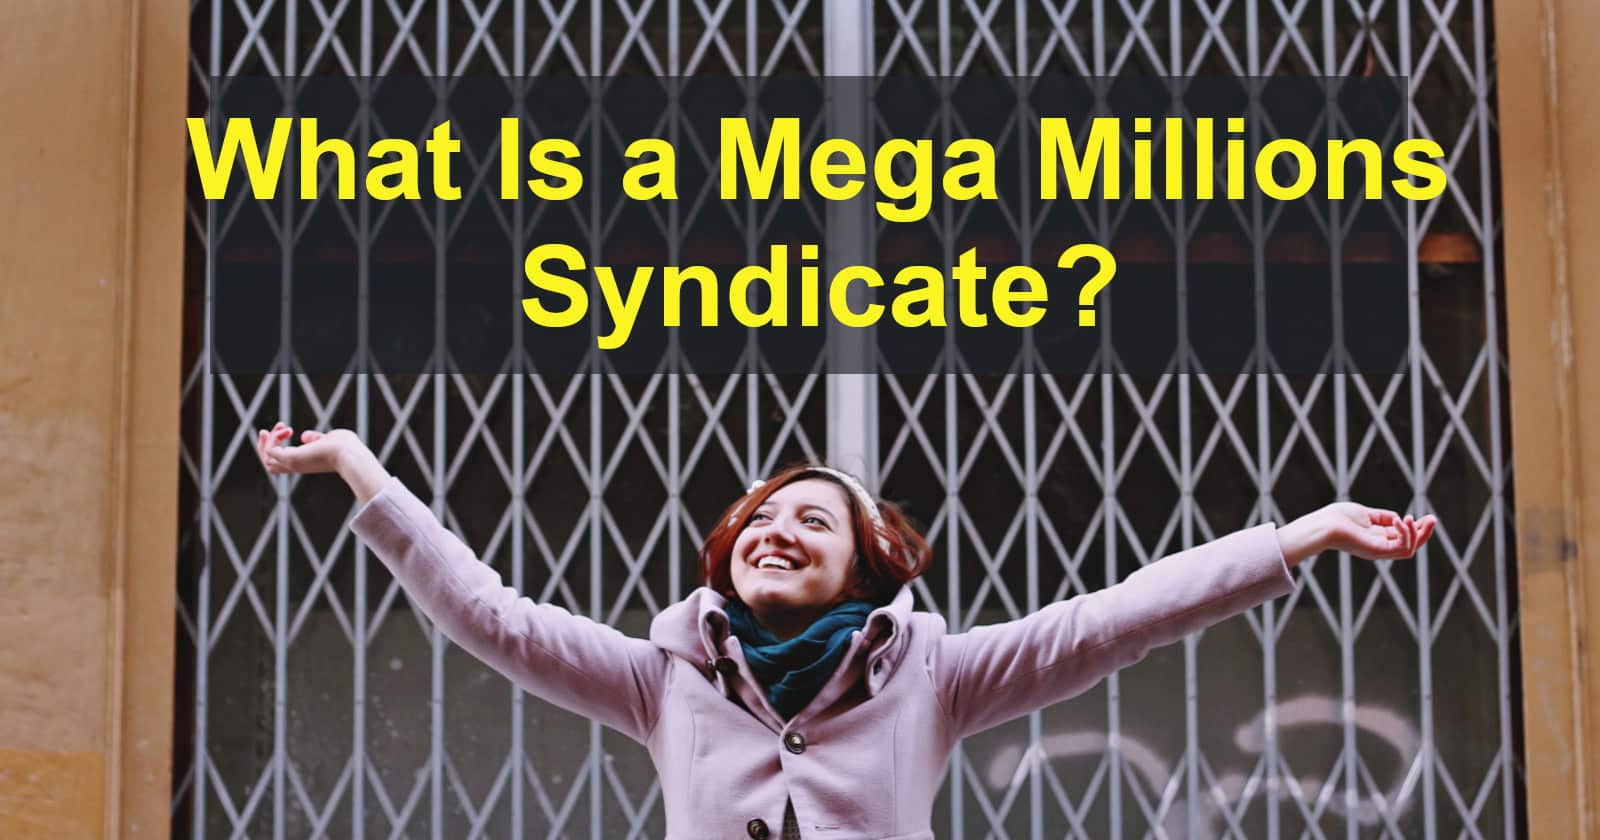 What Is a Mega Millions Syndicate?